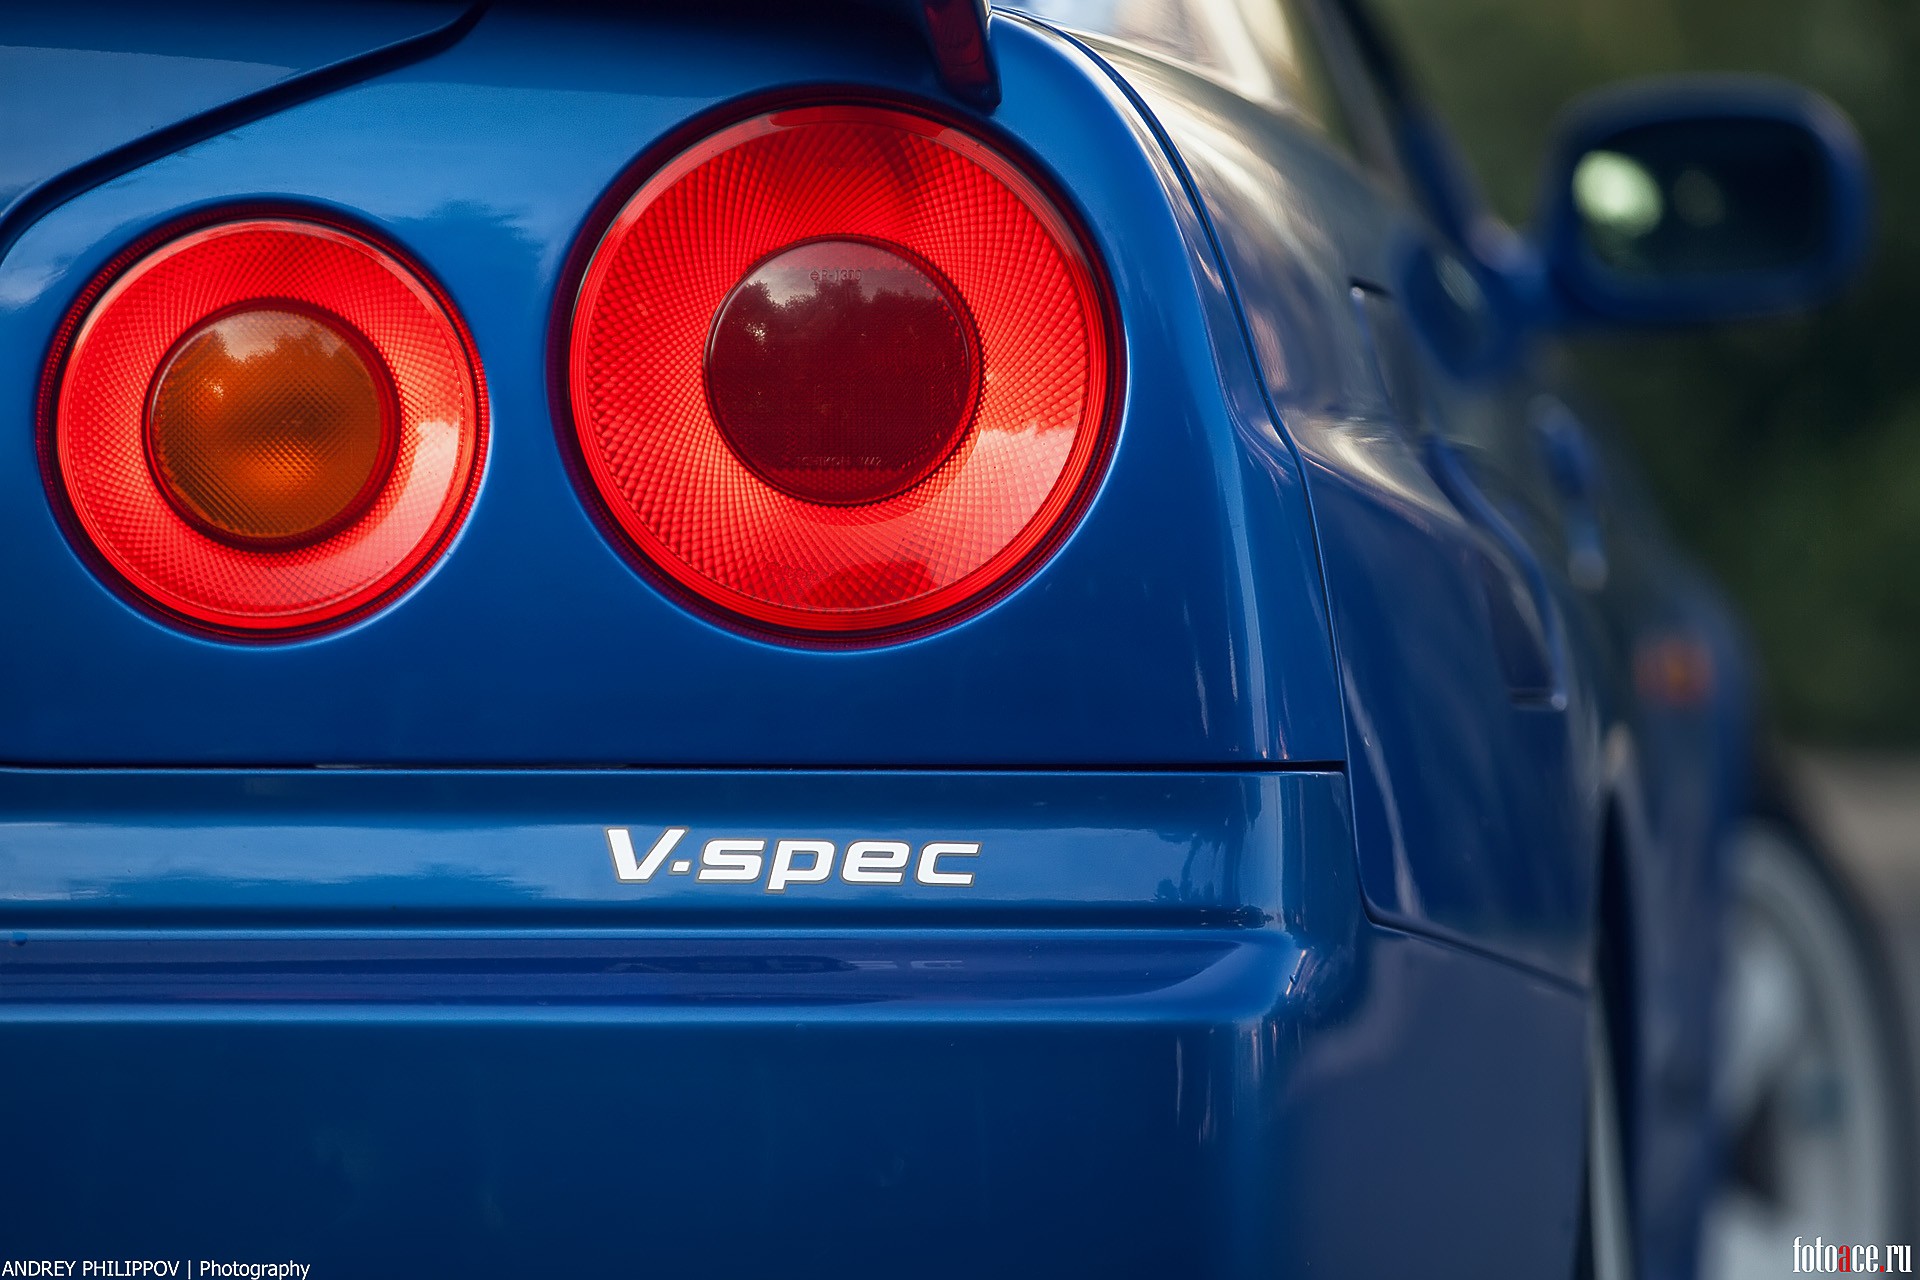 General 1920x1280 car Japanese cars taillights Nissan Nissan Skyline Nissan Skyline R34 blue cars vehicle